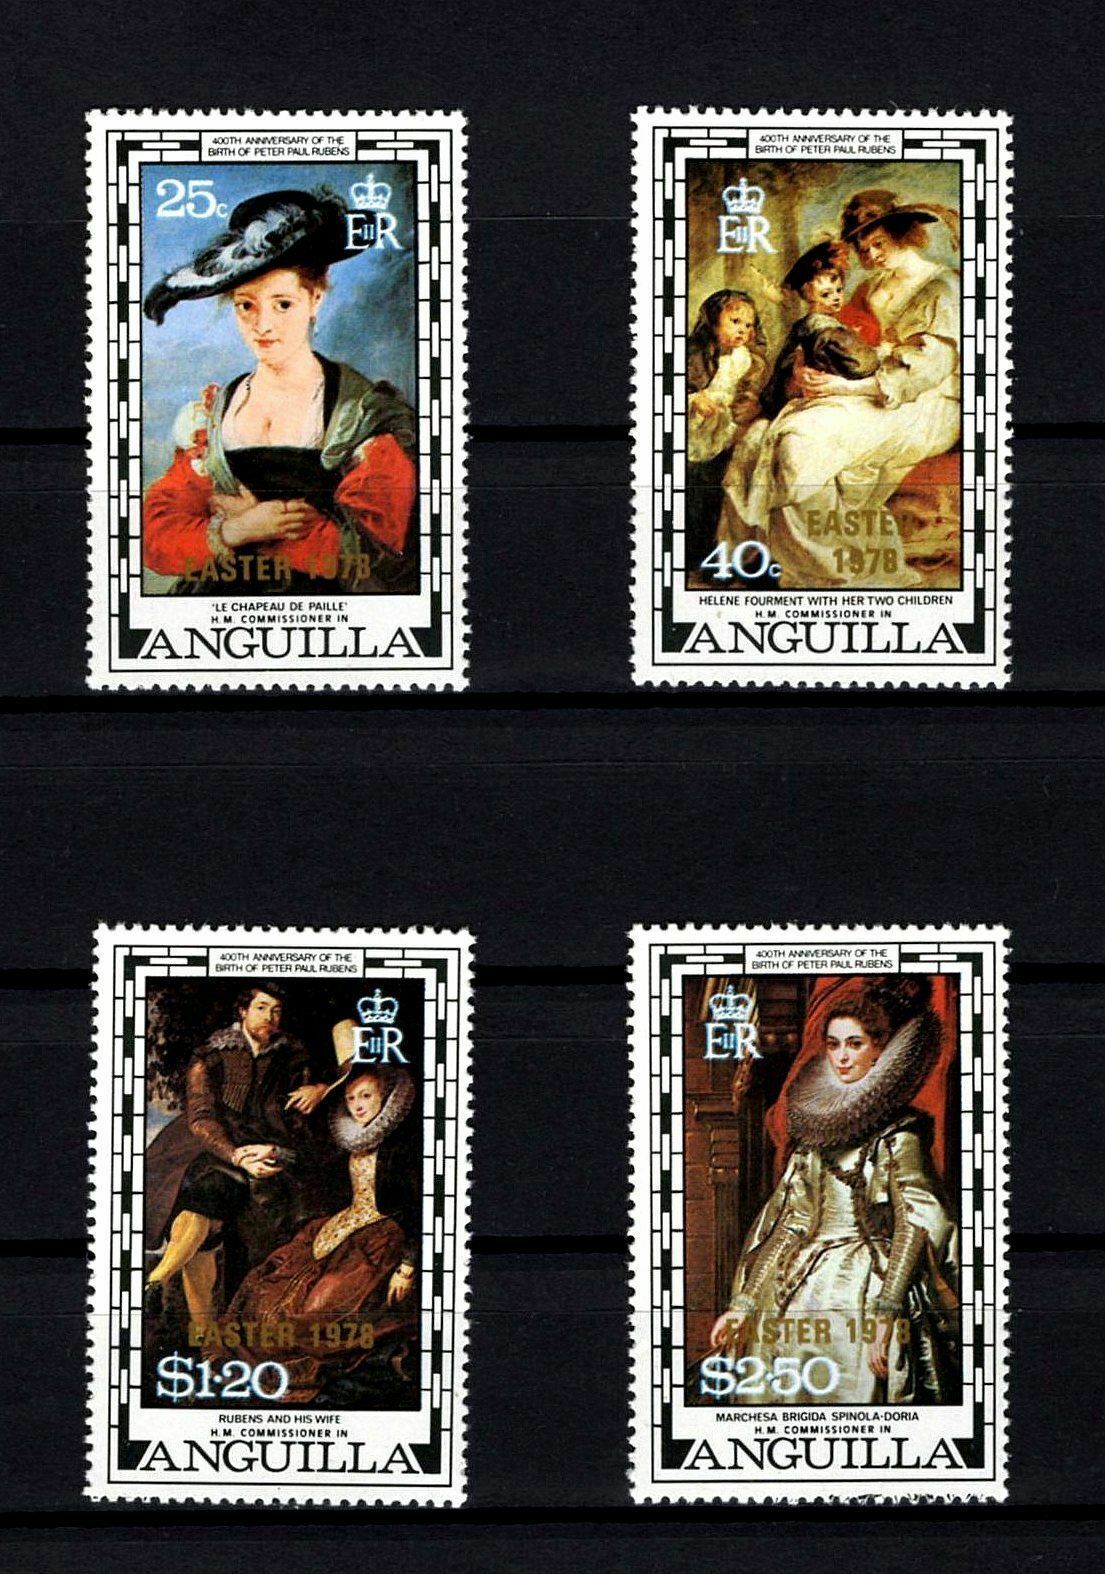 Anguilla - 1978 - Rubens Paintings - Easter Ovpt - 4 X Mint - Mnh Set!